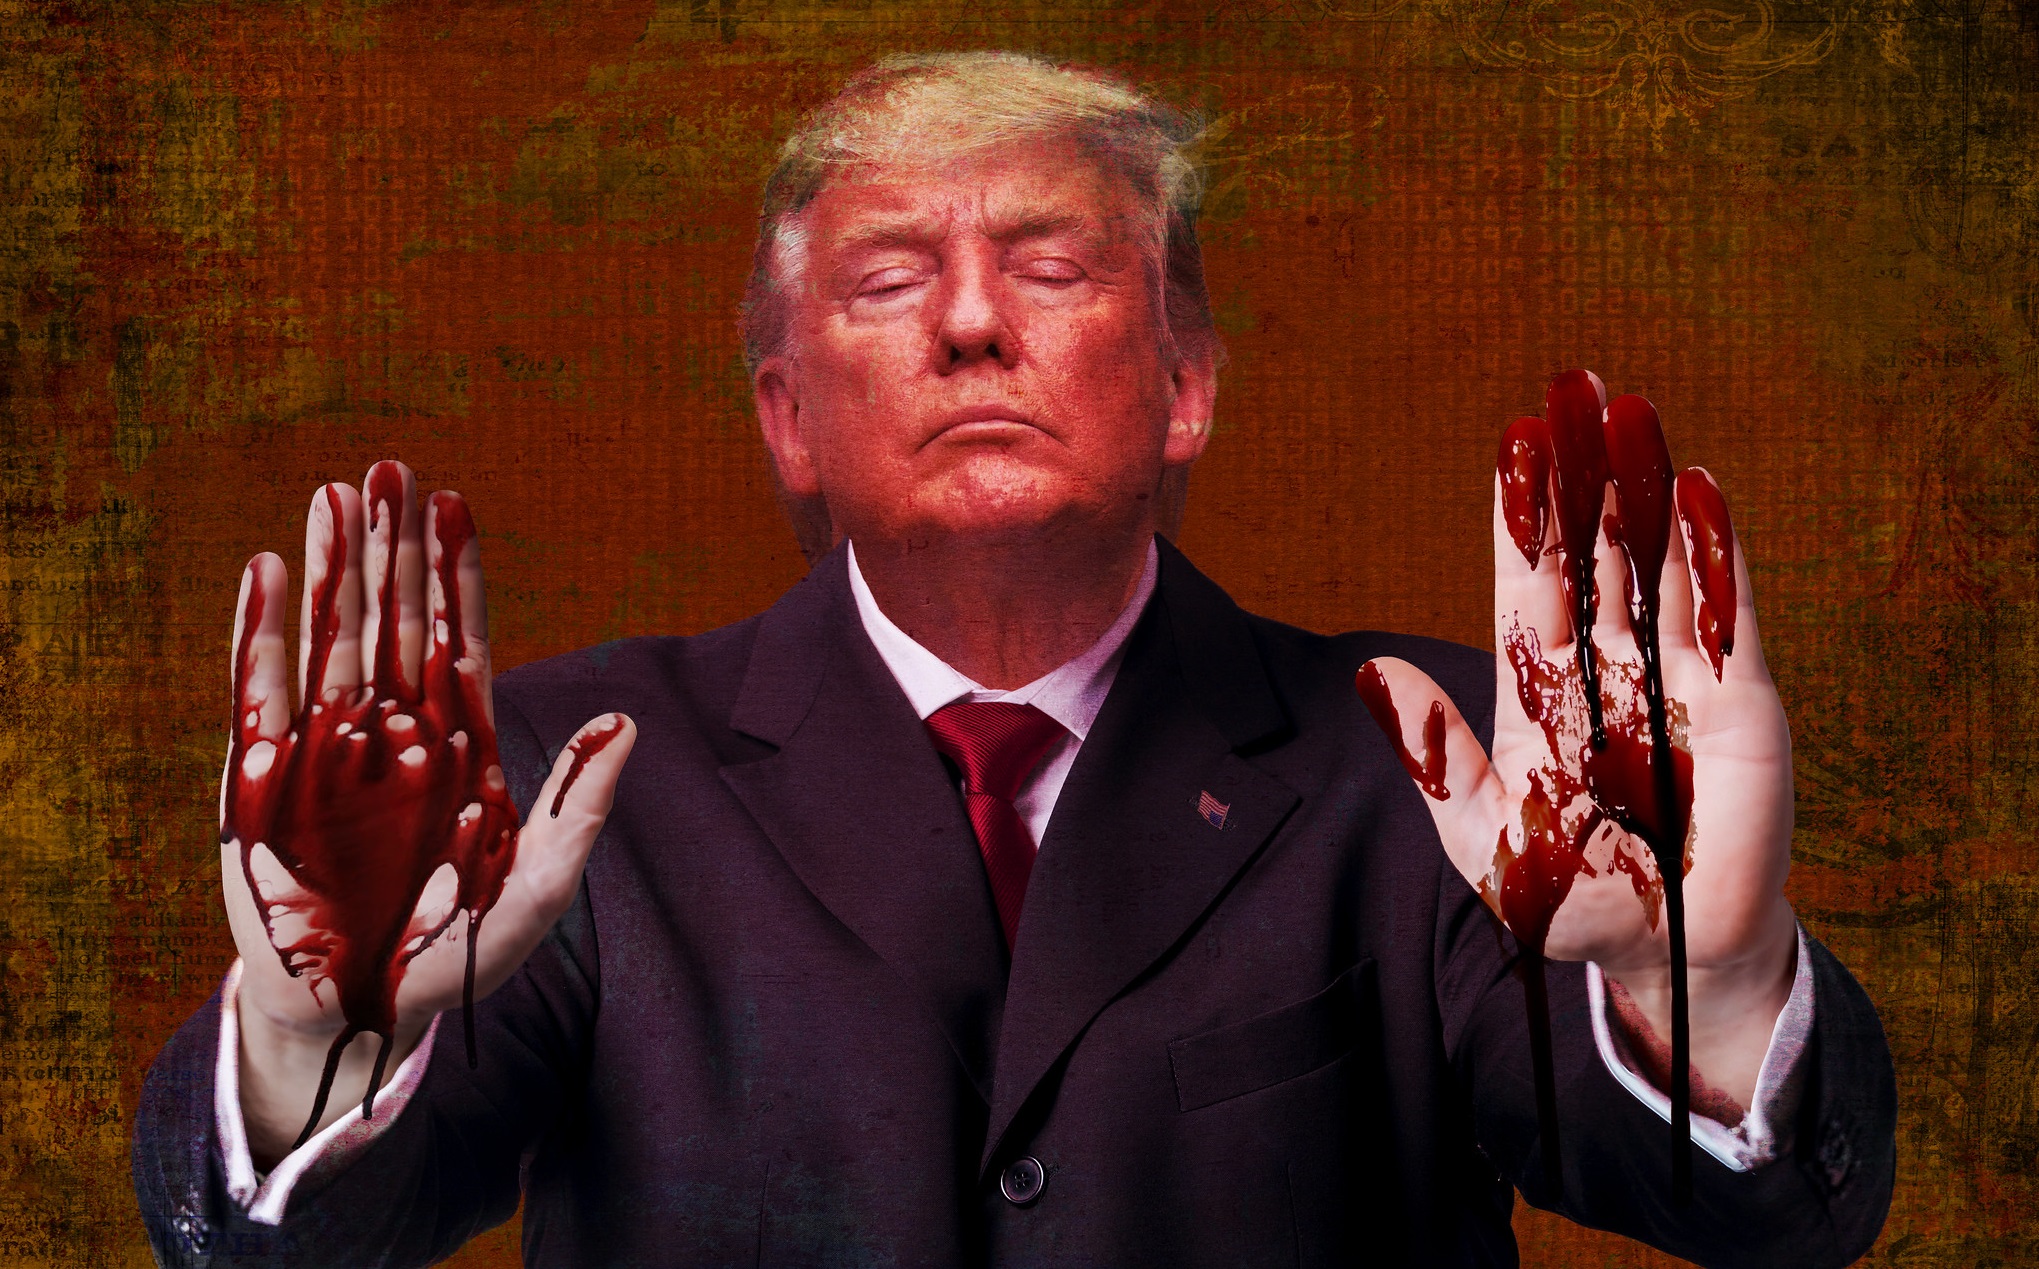 Trump bloody hands Image outtacontext Flickr